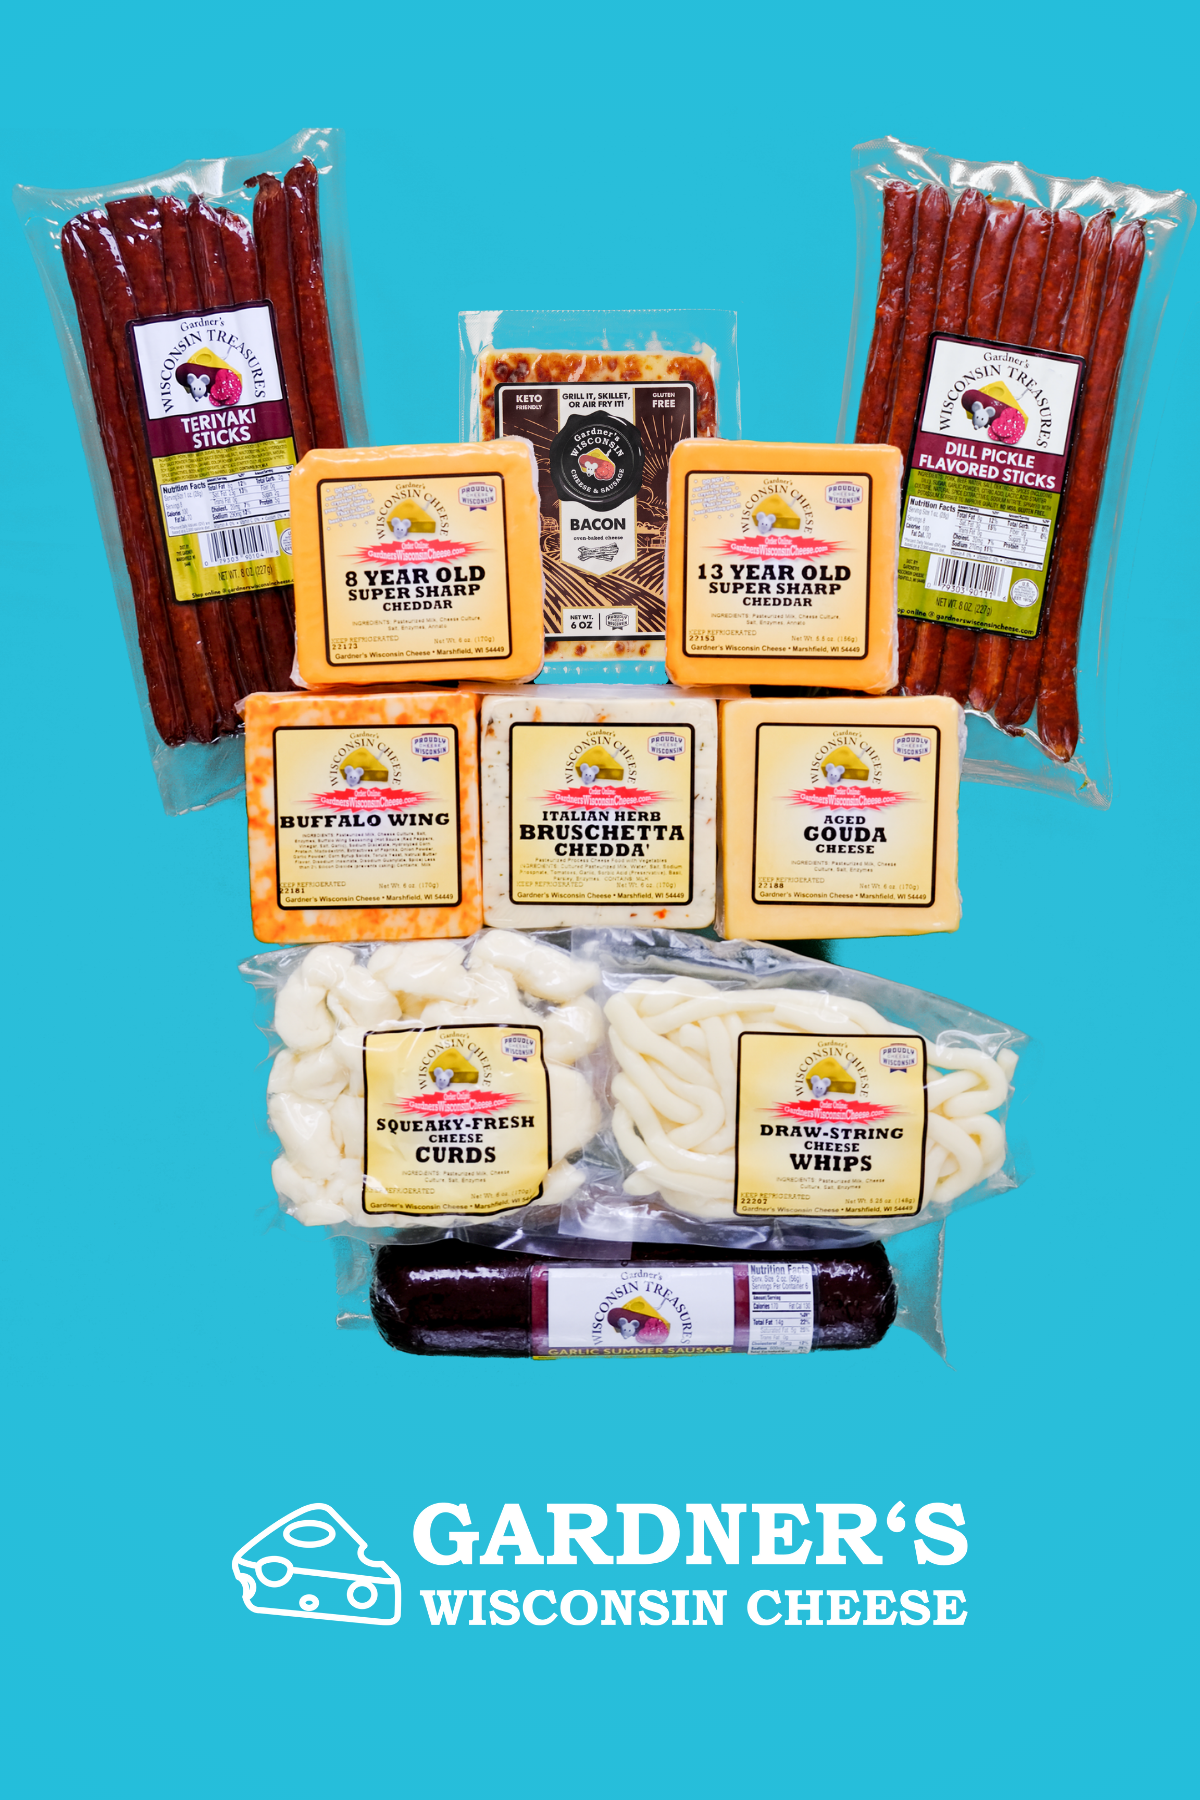 ULTIMATE Wisconsin Cheese and Sausage Package - Gardners Wisconsin Cheese and Sausage